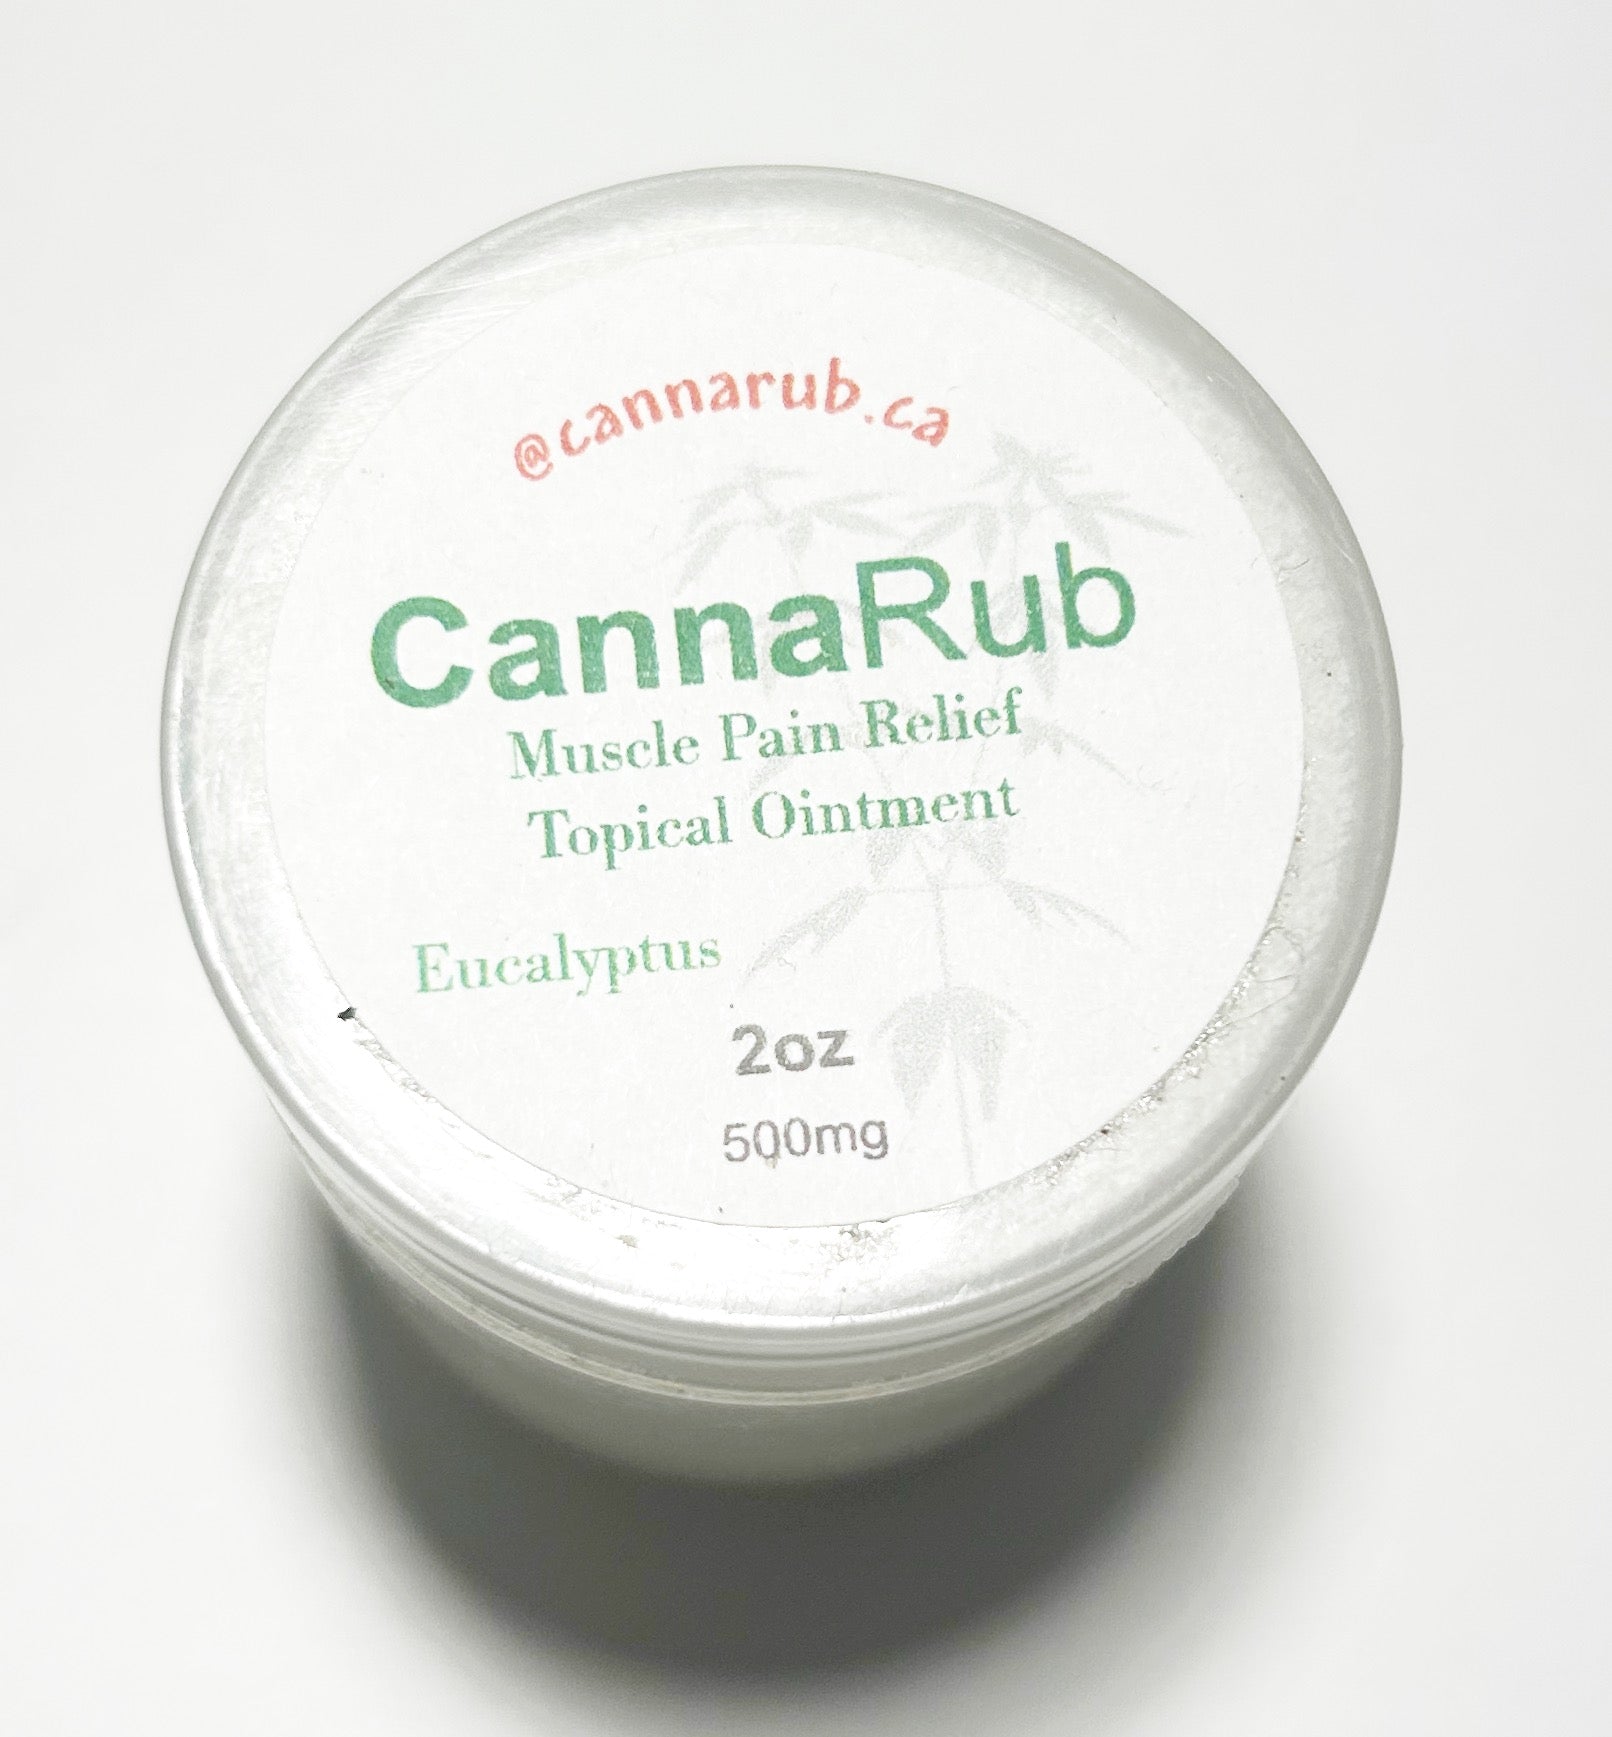 Canna Rub Muscle Pain Relief Topical Ointment